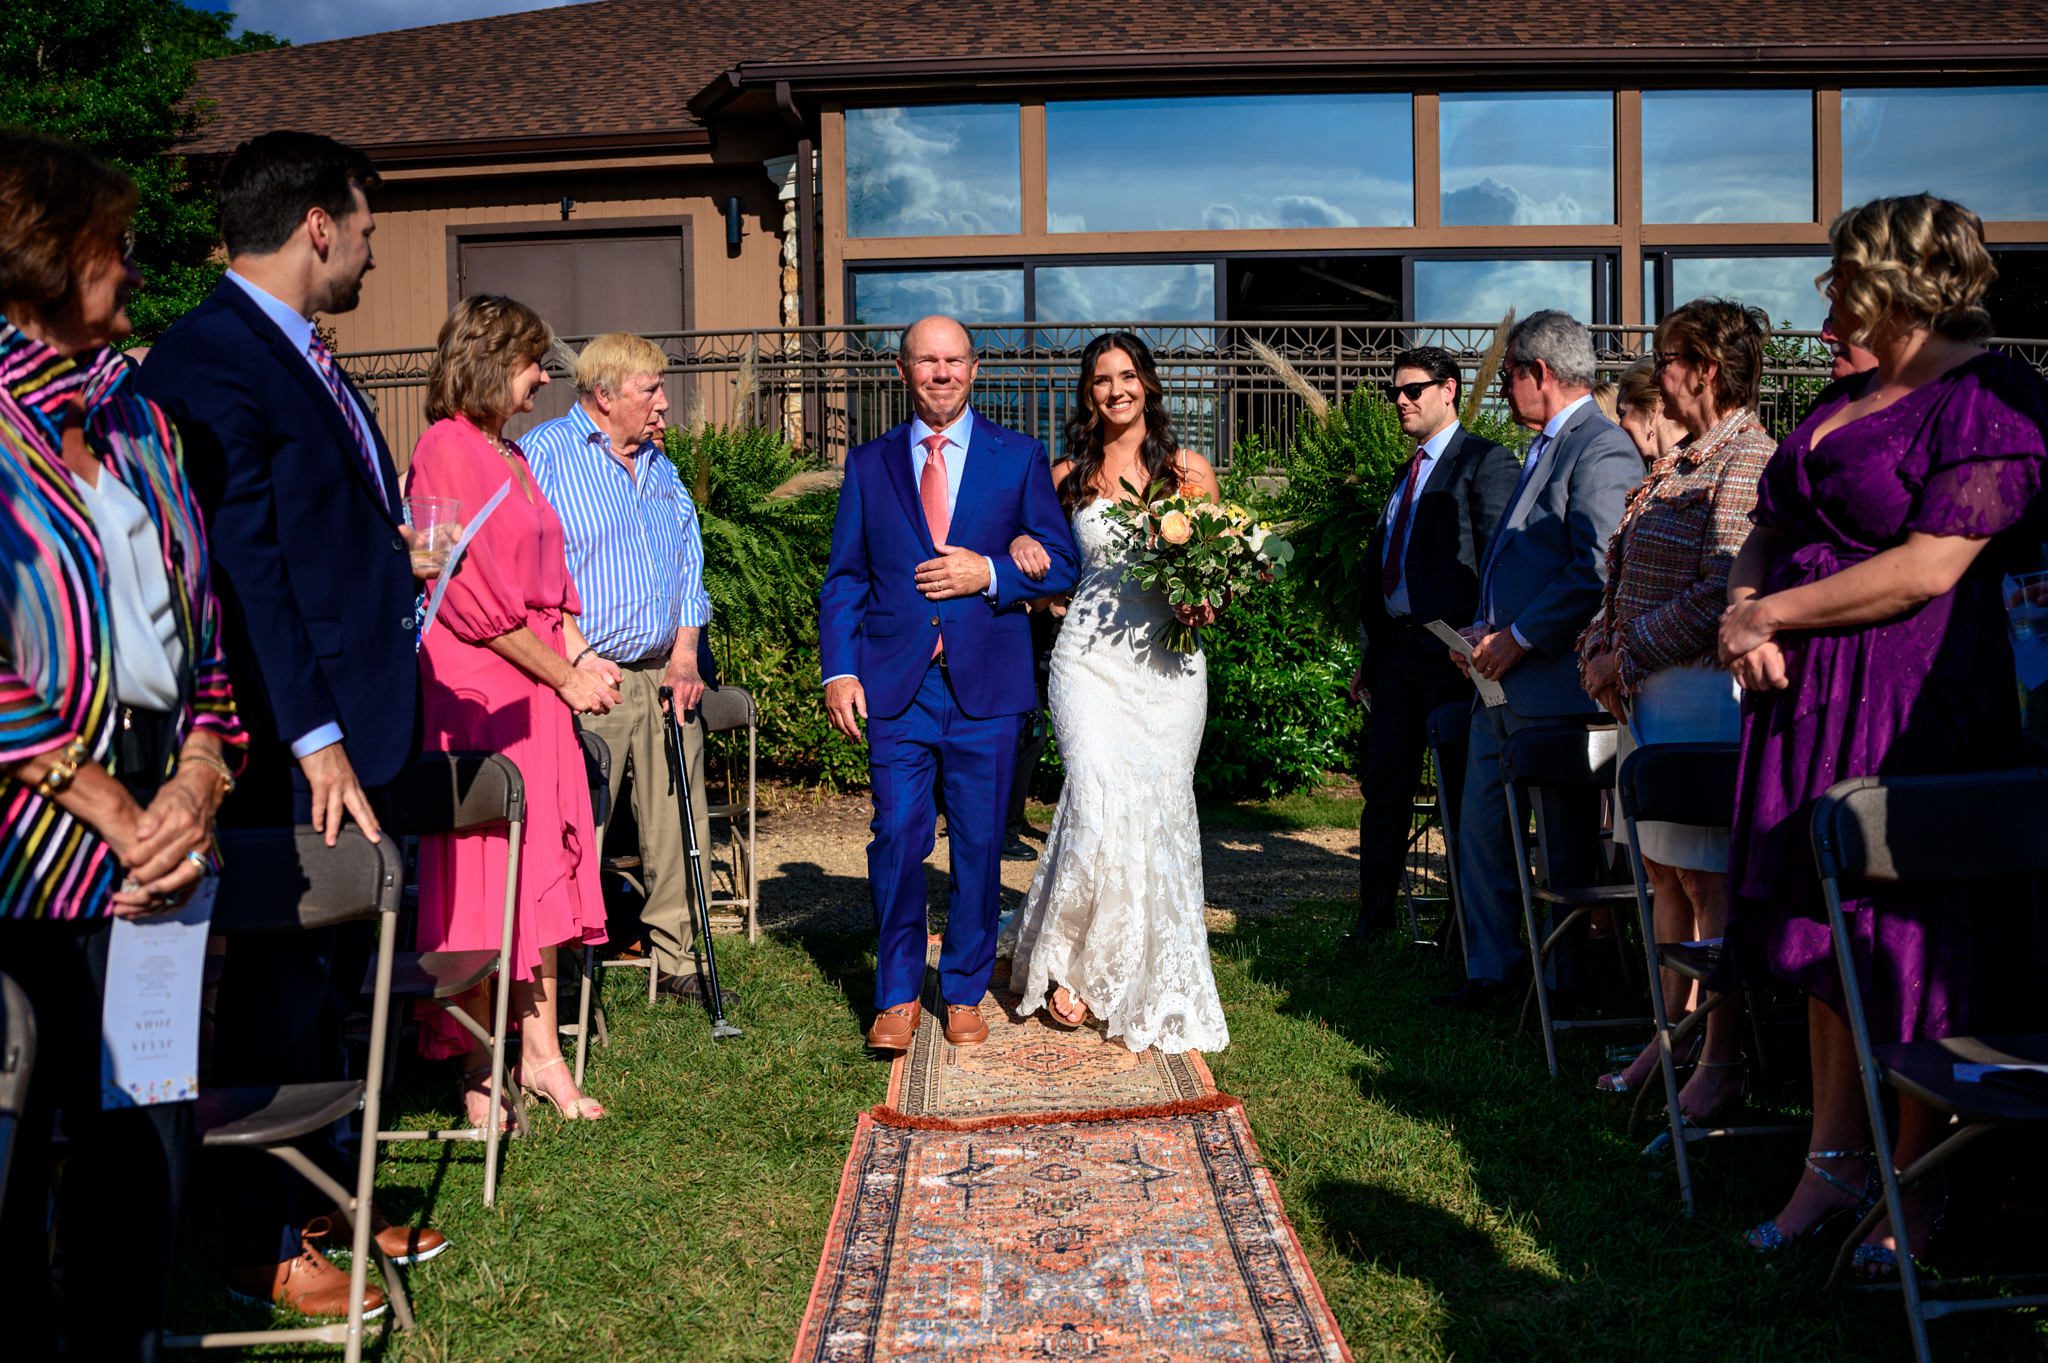 outdoor wedding ceremony at crest pavilion in asheville nc with mountains in the background